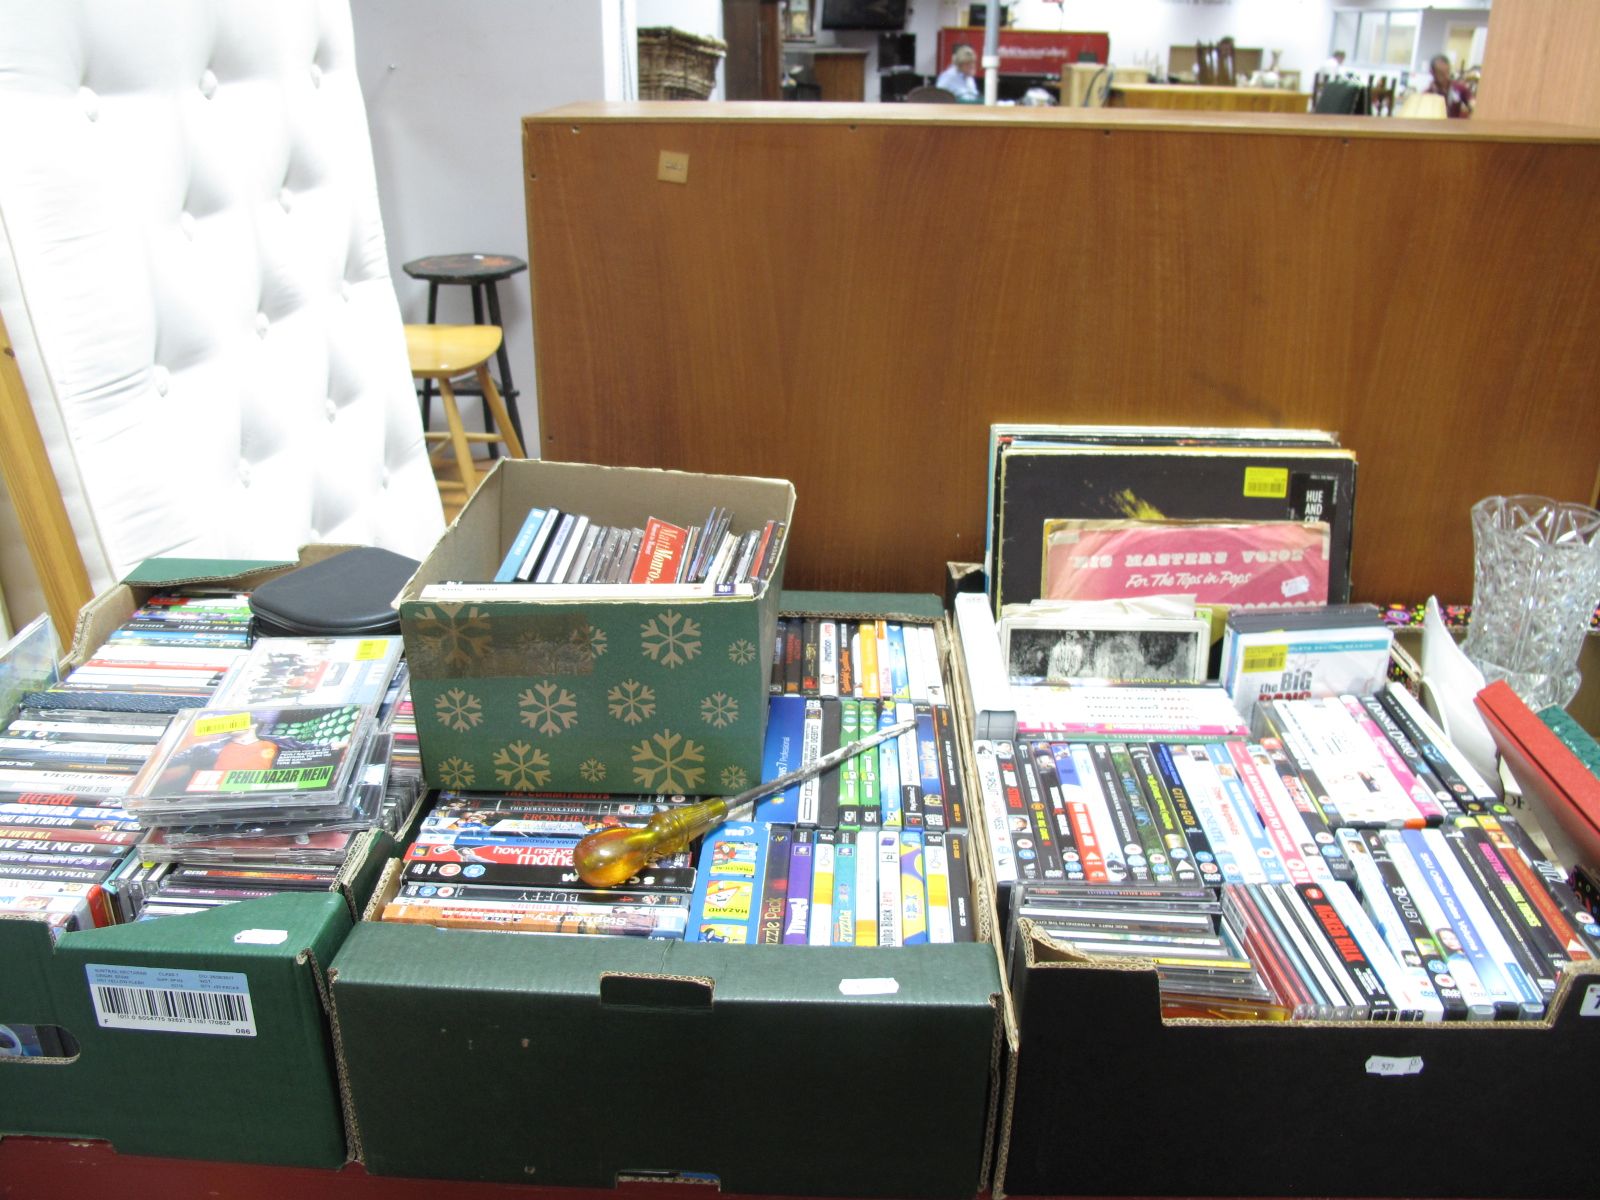 A Quantity of DVD's, CD's (many modern titles noted) LP's, 45RPM's, etc:- Three Boxes